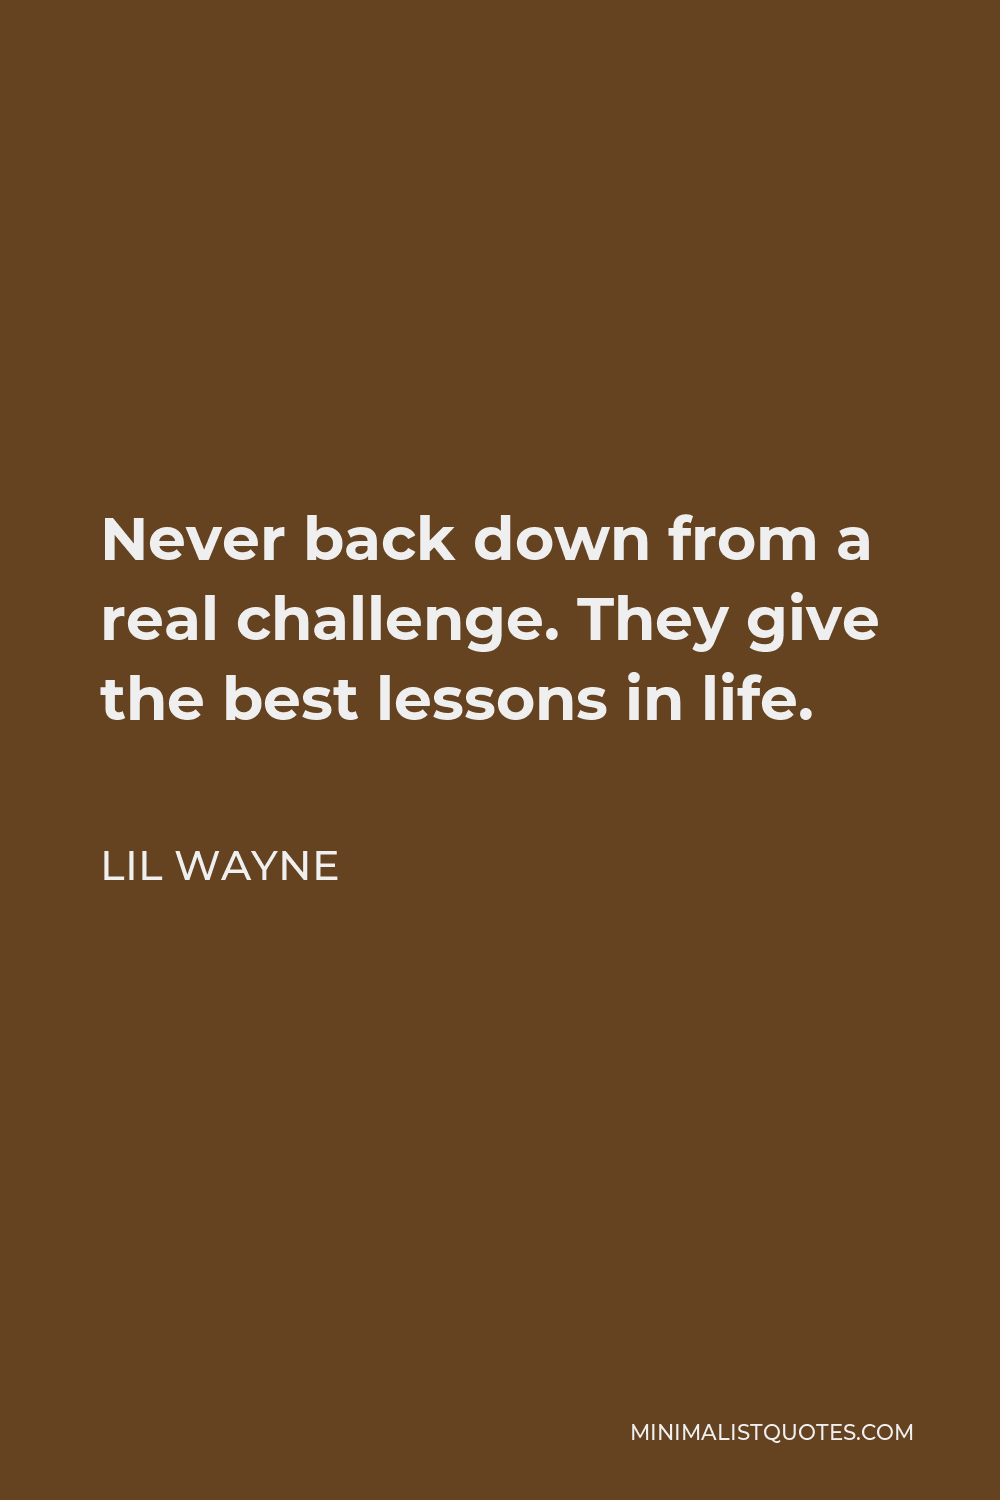 Lil Wayne Quote - Never back down from a real challenge. They give the best lessons in life.